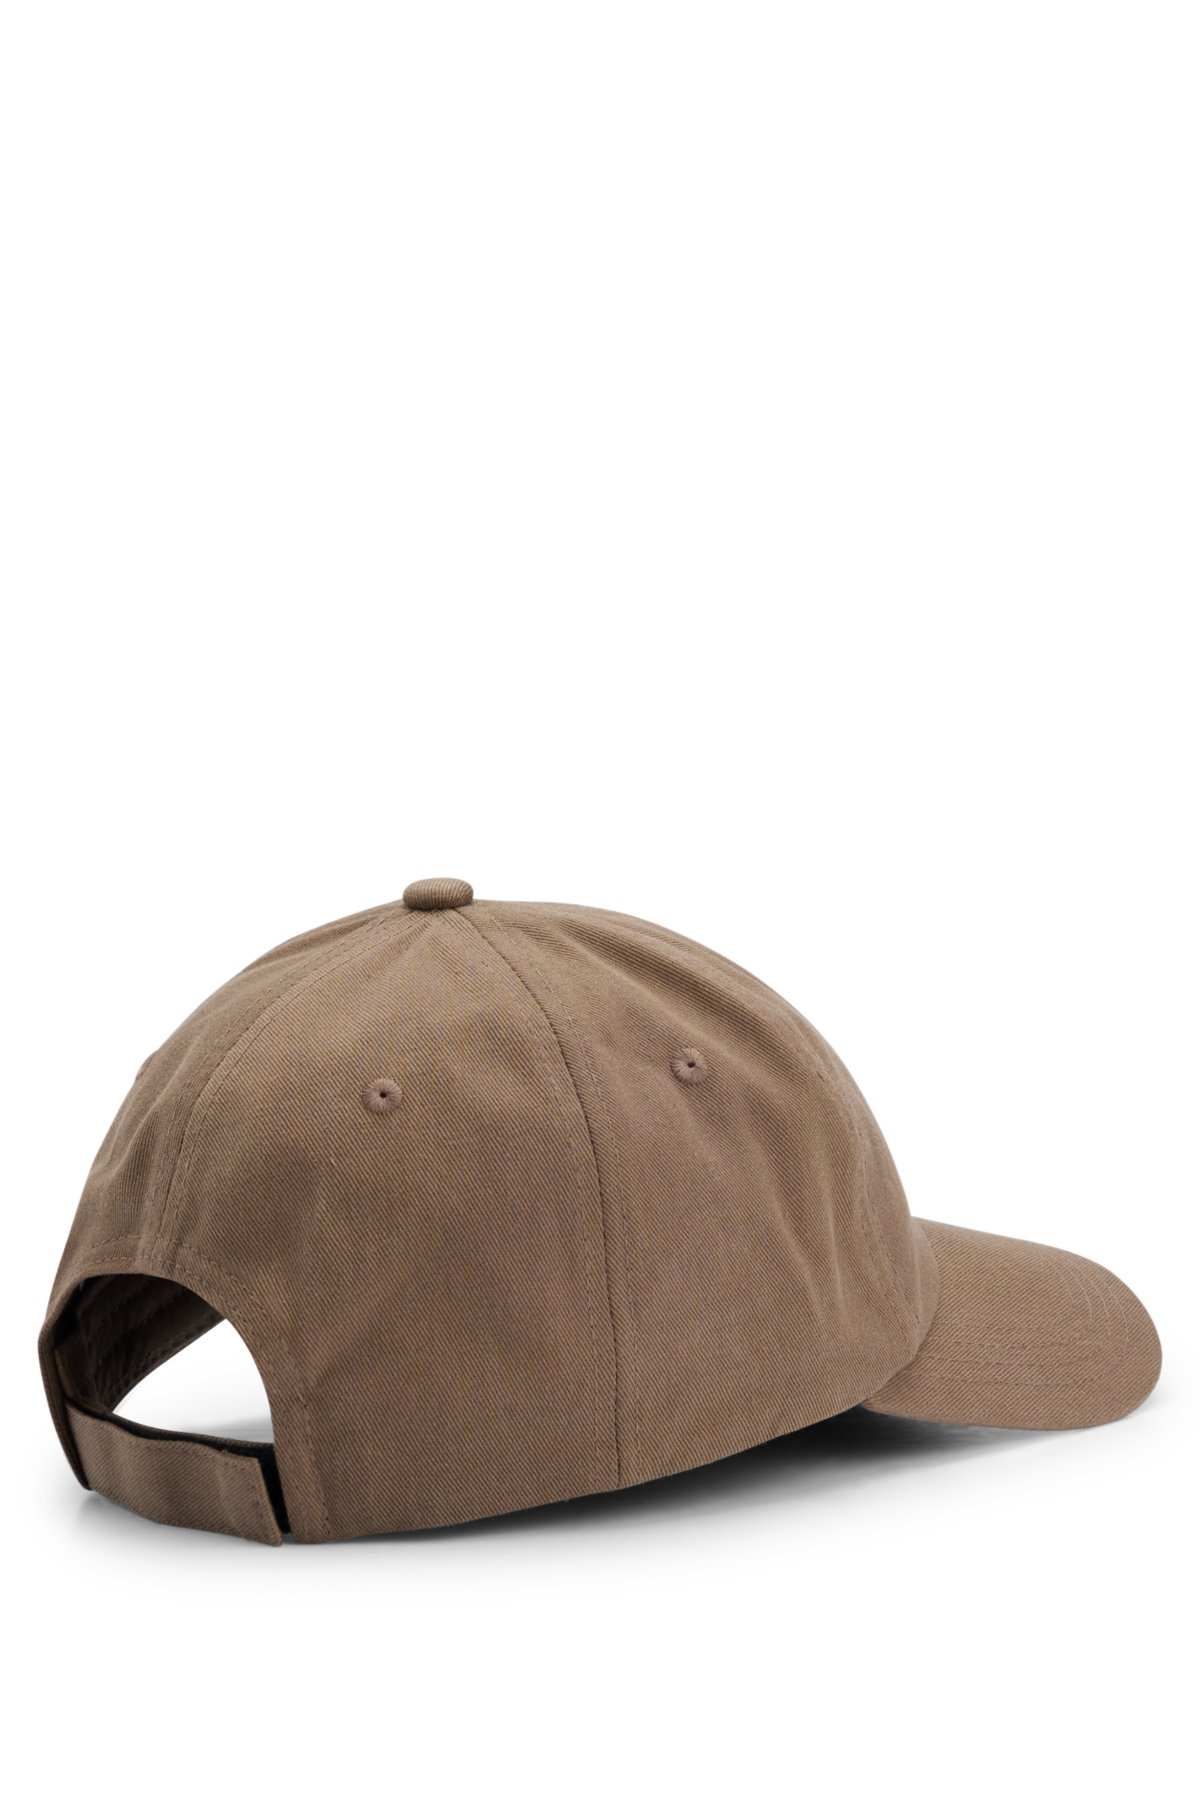 Cotton-twill cap with logo patch, Light Brown